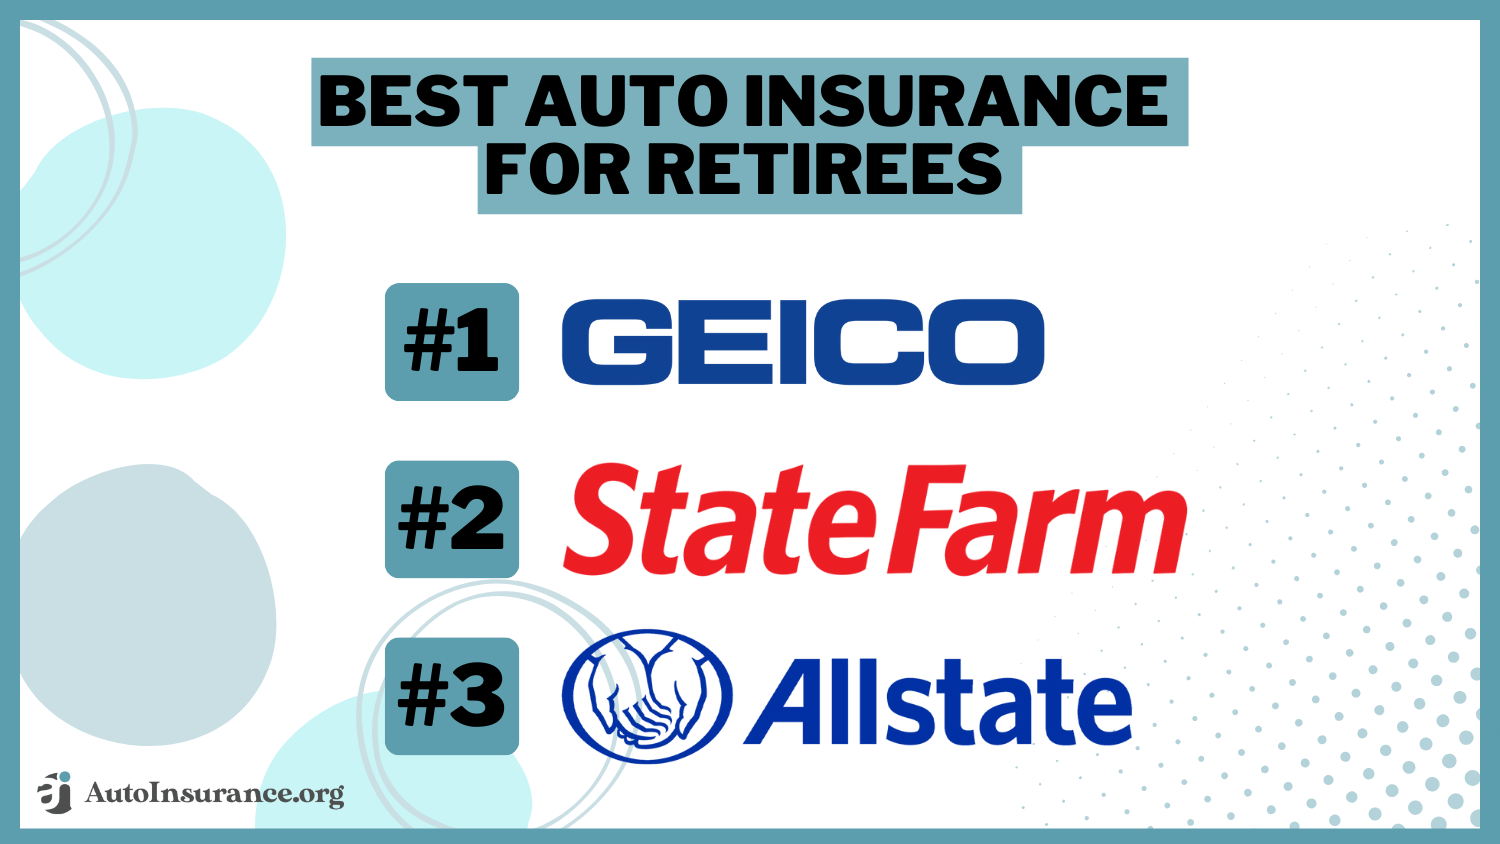 Best Auto Insurance for Retirees: Geico, State Farm, Allstate